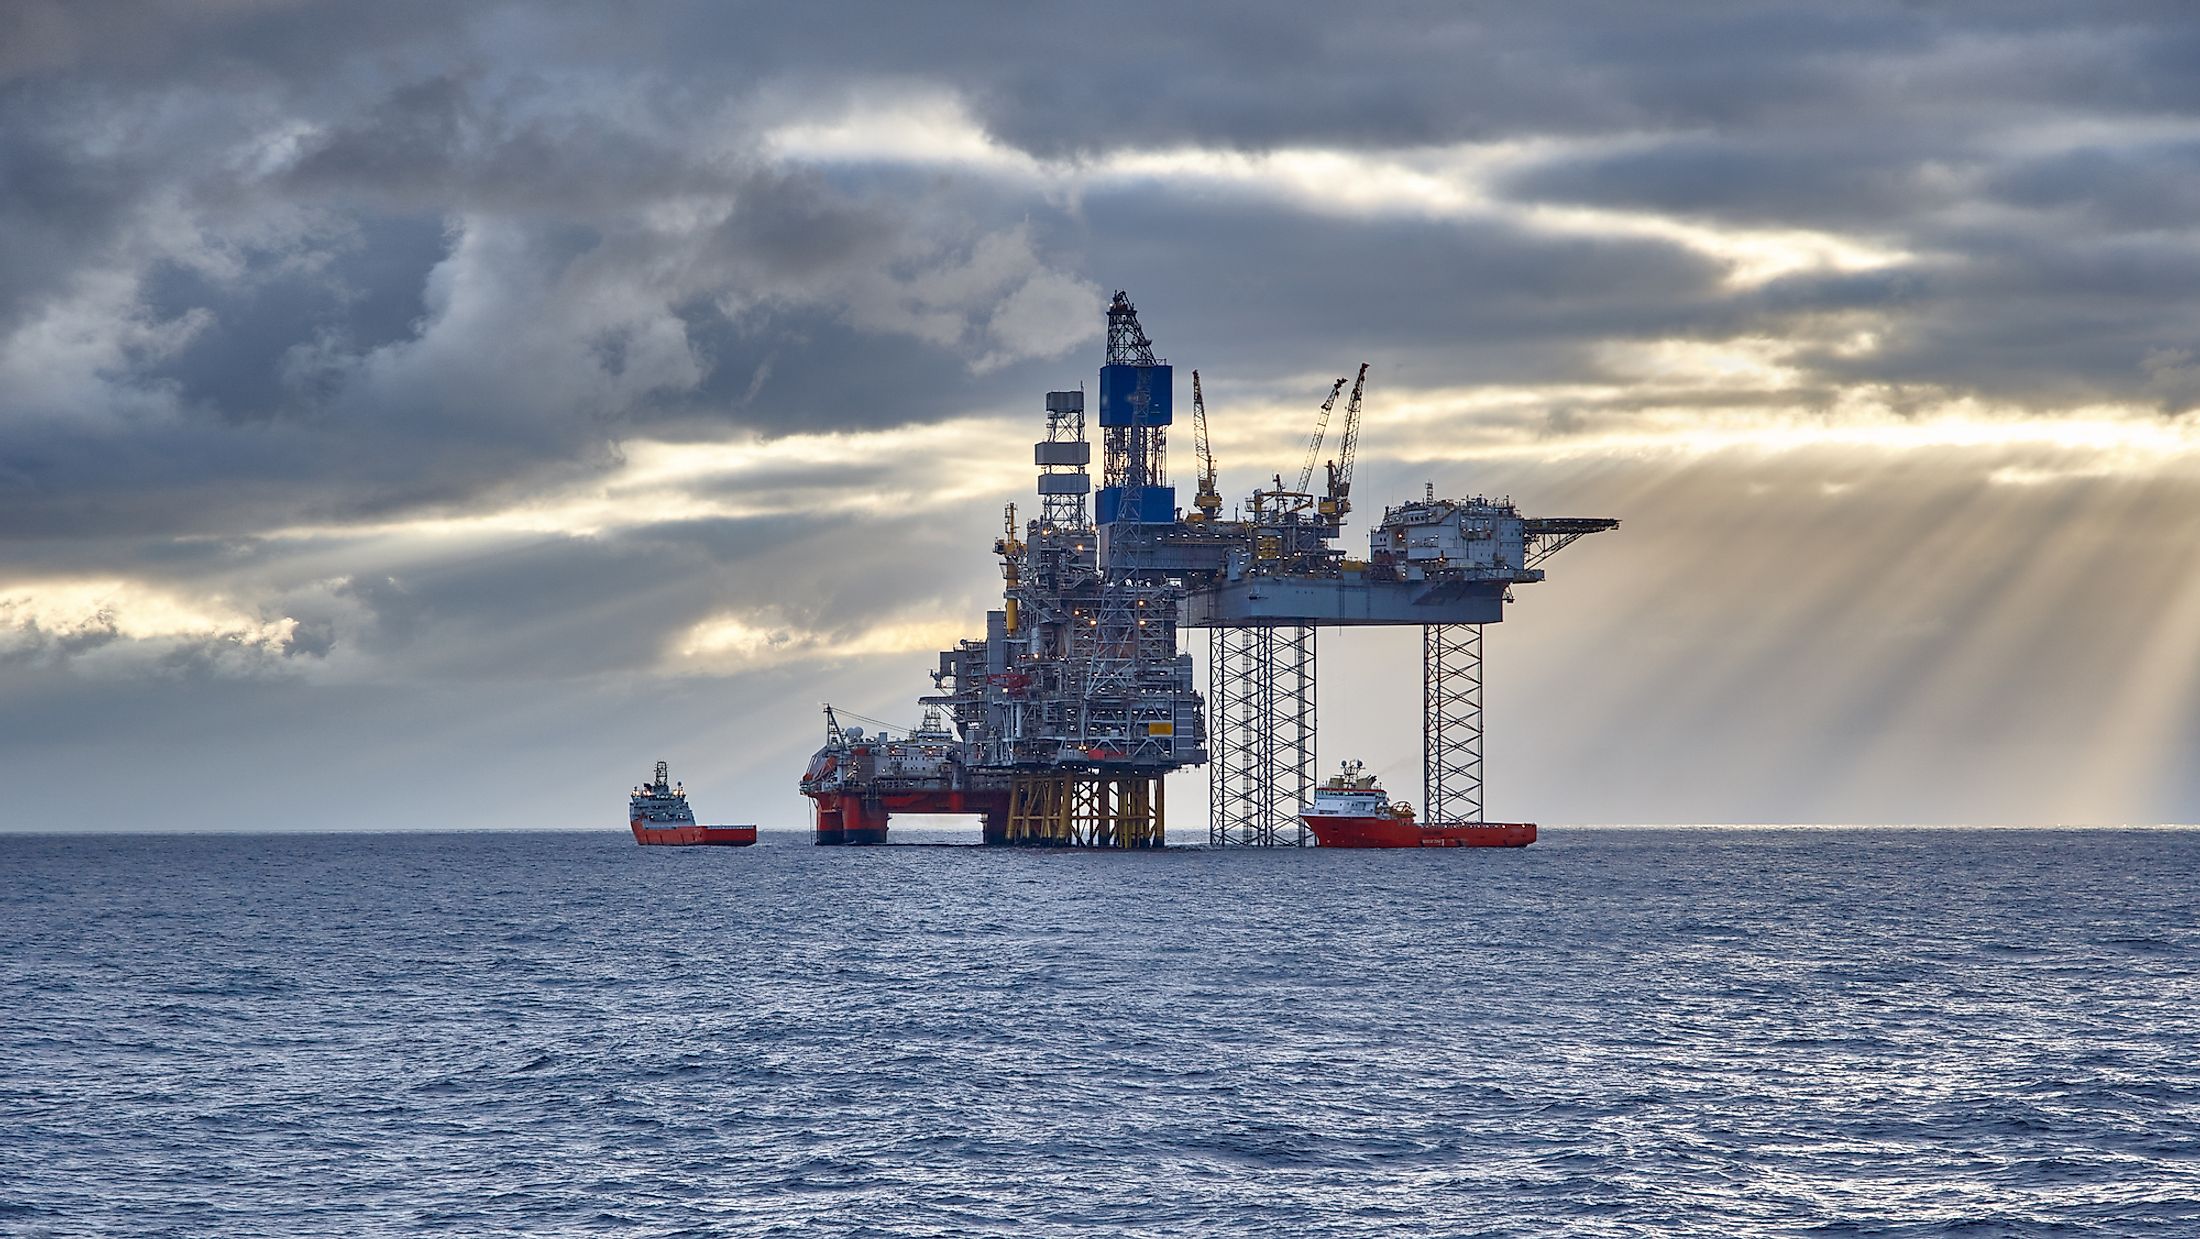 Oil and gas industry in the North Sea. Image credit:  Igor Hotinsky/Shutterstock.com